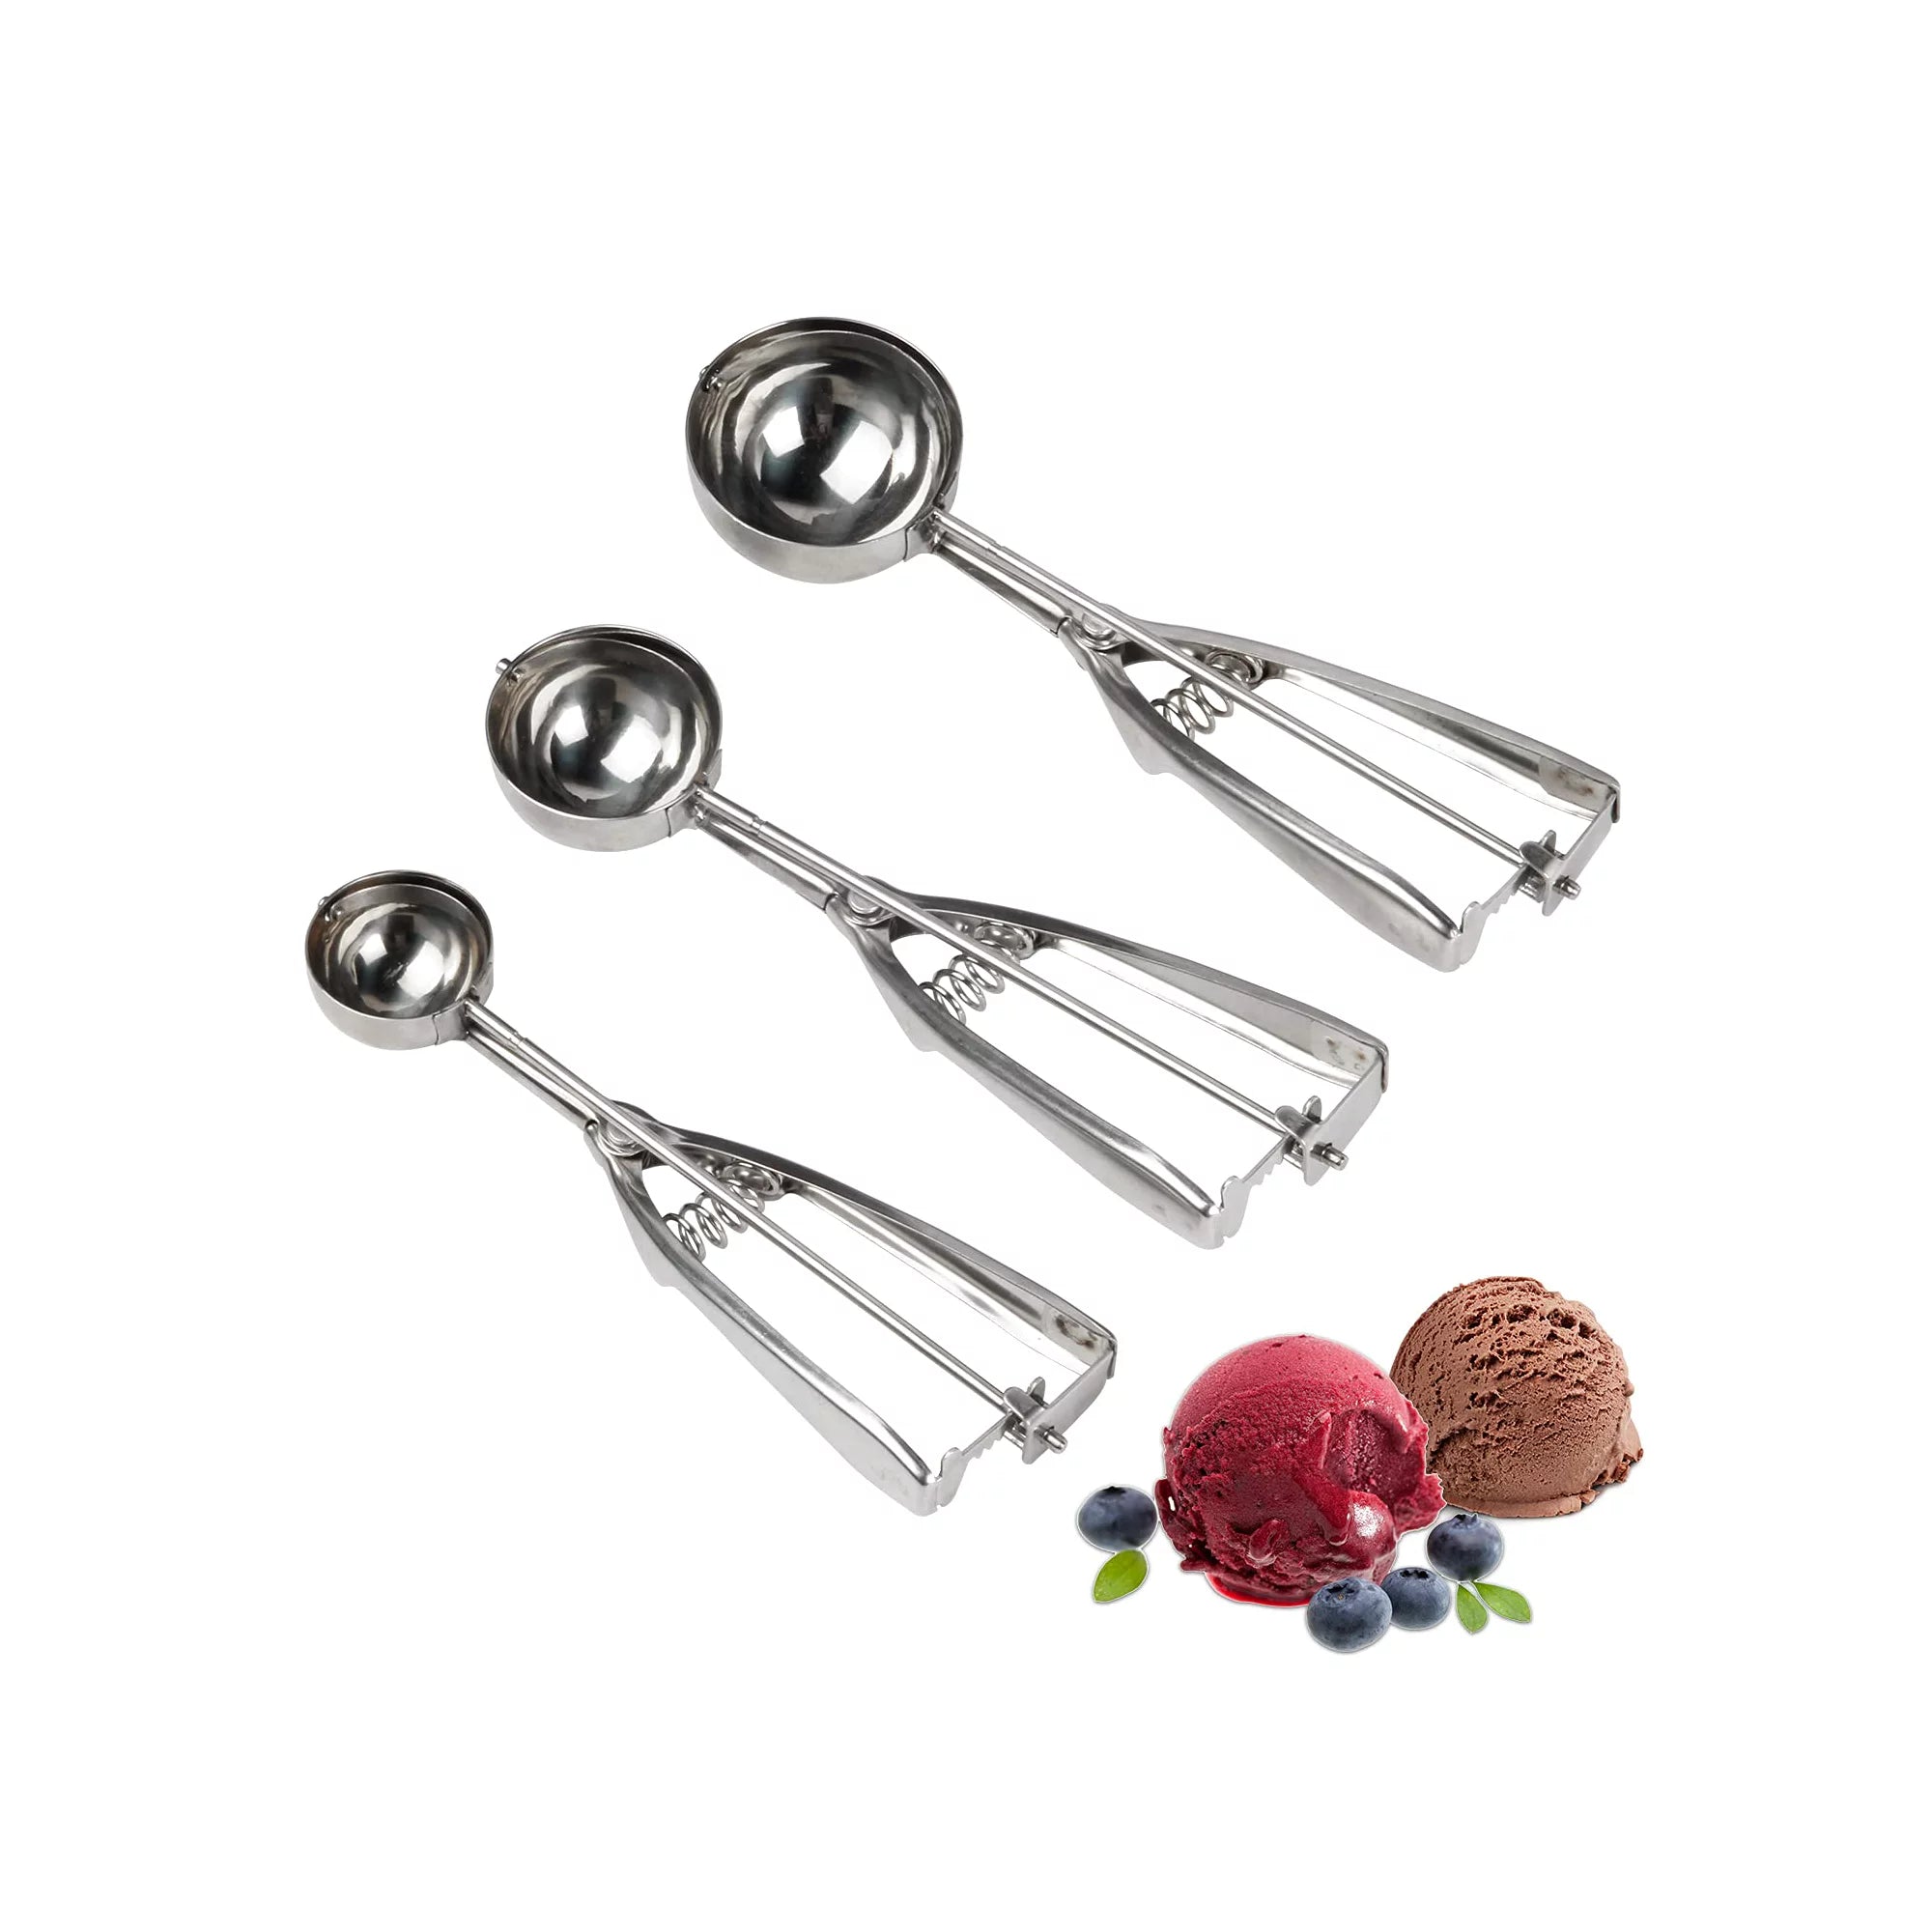 Cookie Scoop Set, Ice Cream Scoop Set, 3 Pcs Ice Cream Scoops Trigger Include Large Medium Small Size Cookie Scoop, Polishing Stainless Steel 18/8